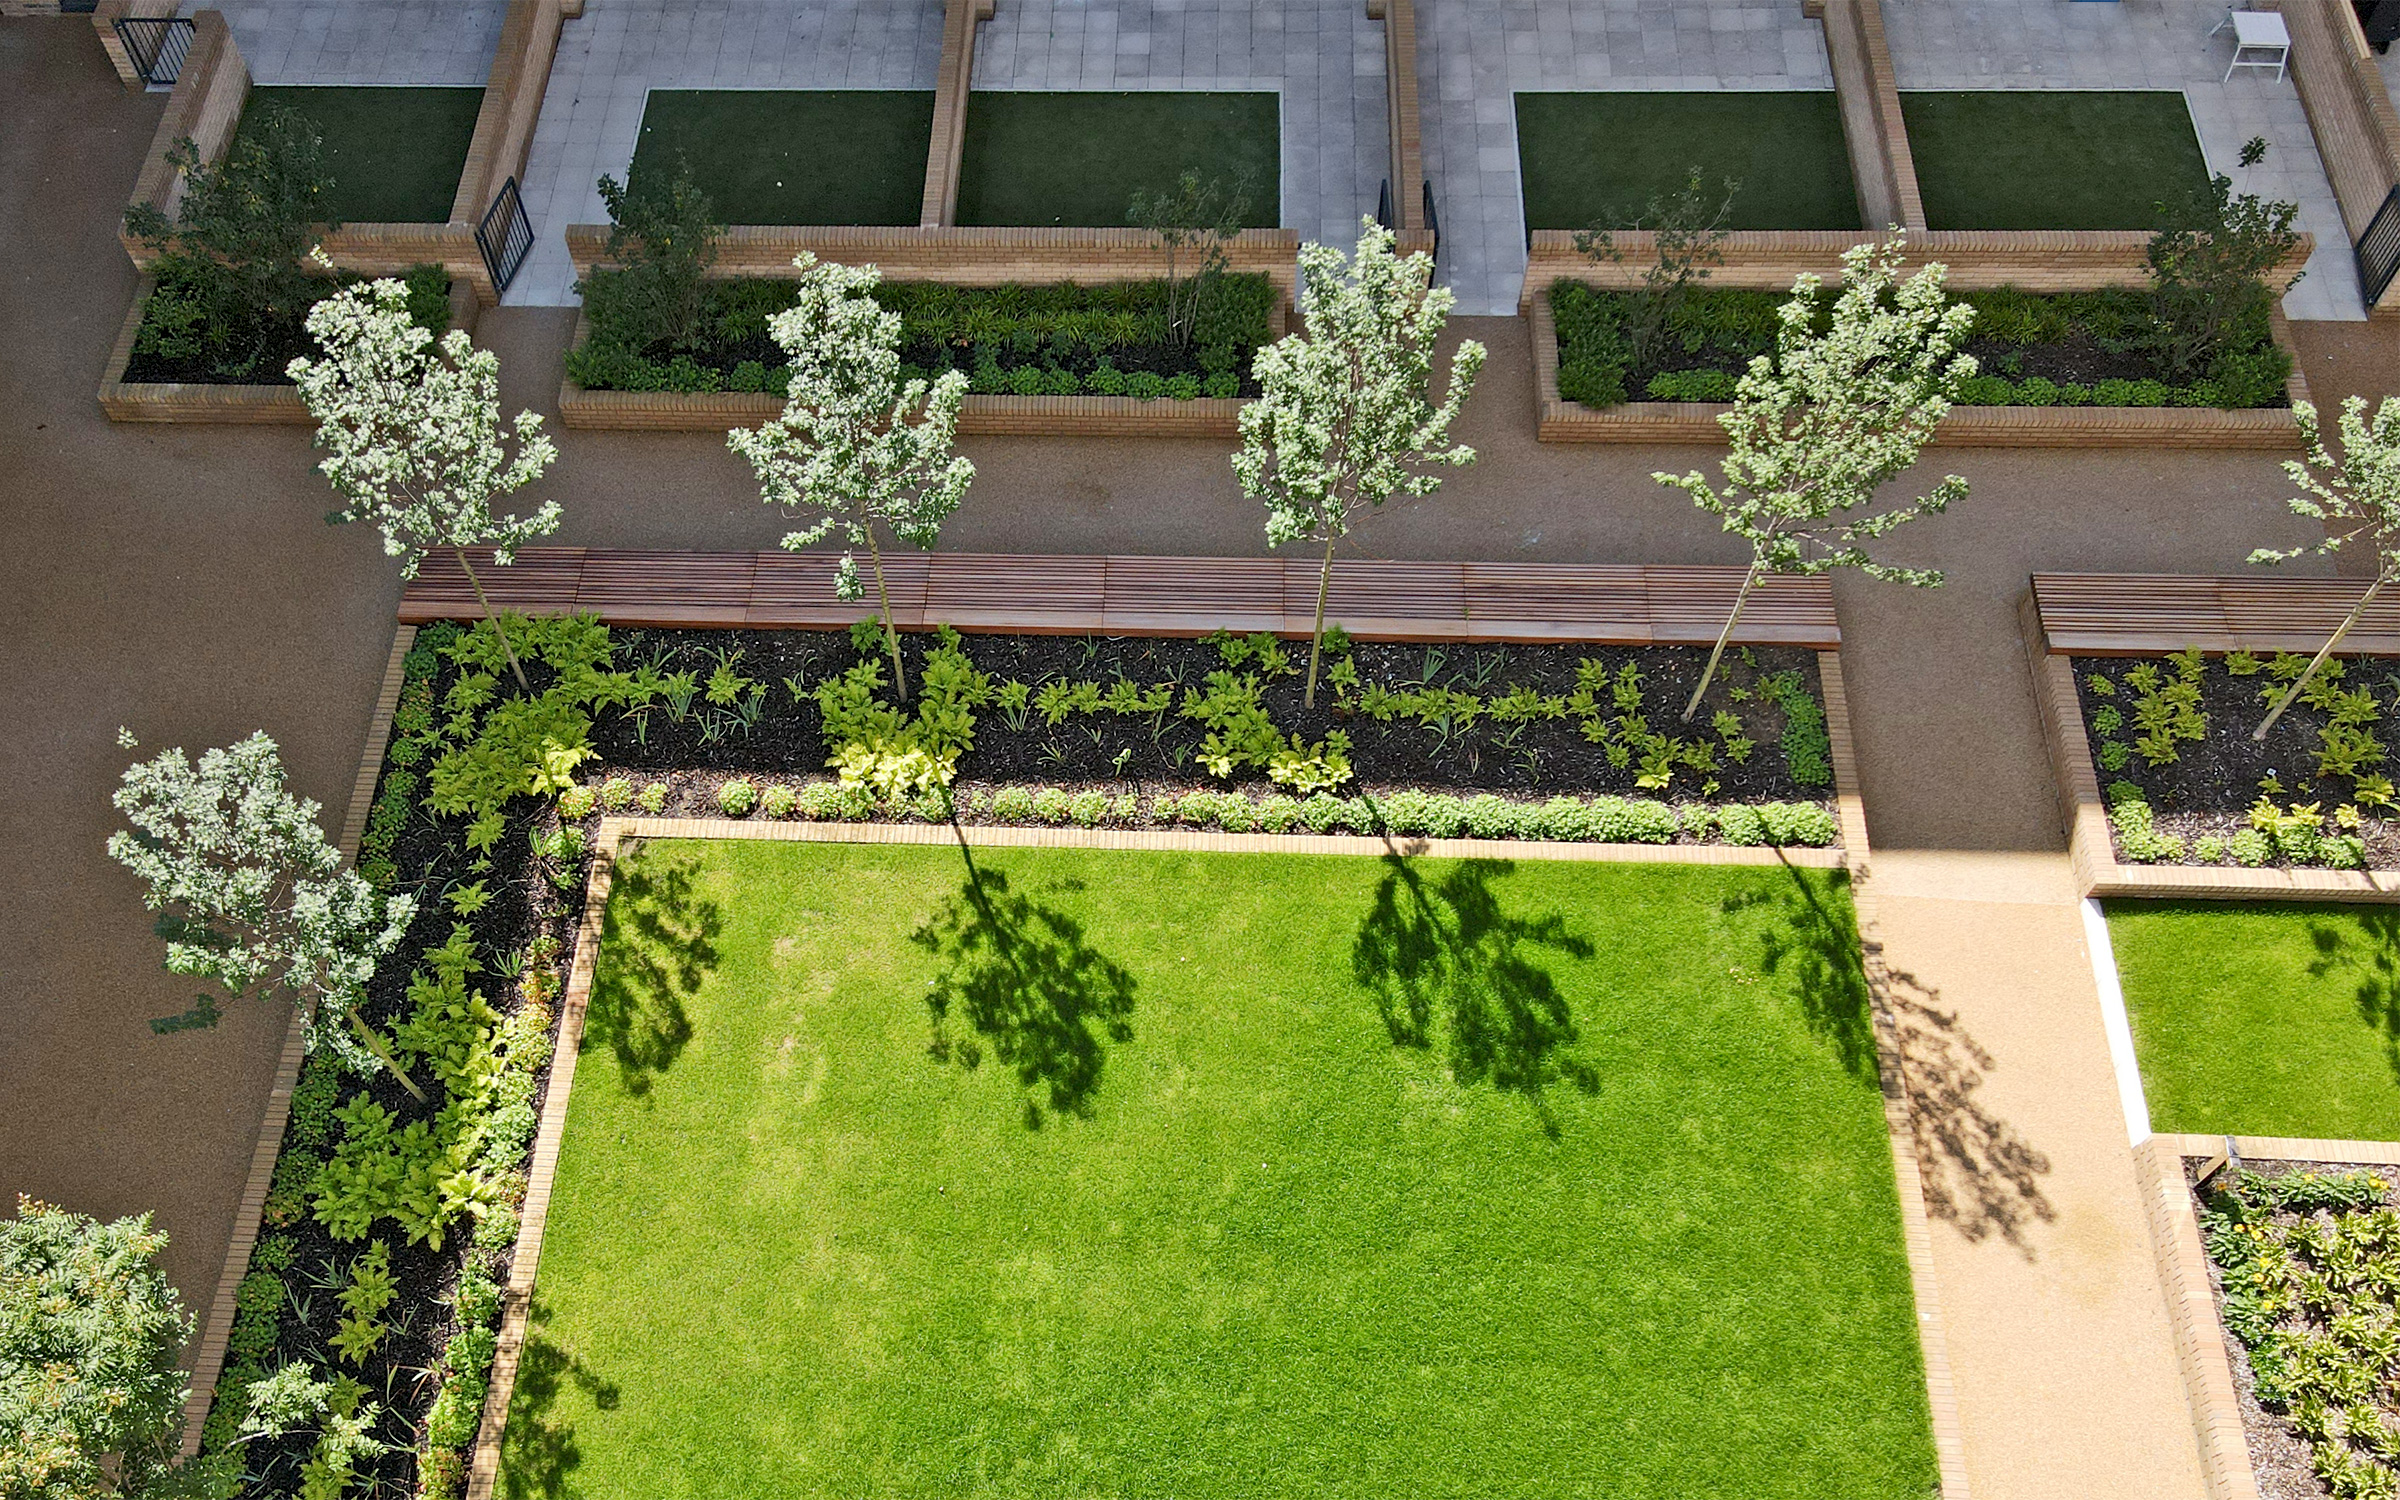 Courtyard with lawn, walkways and small trees